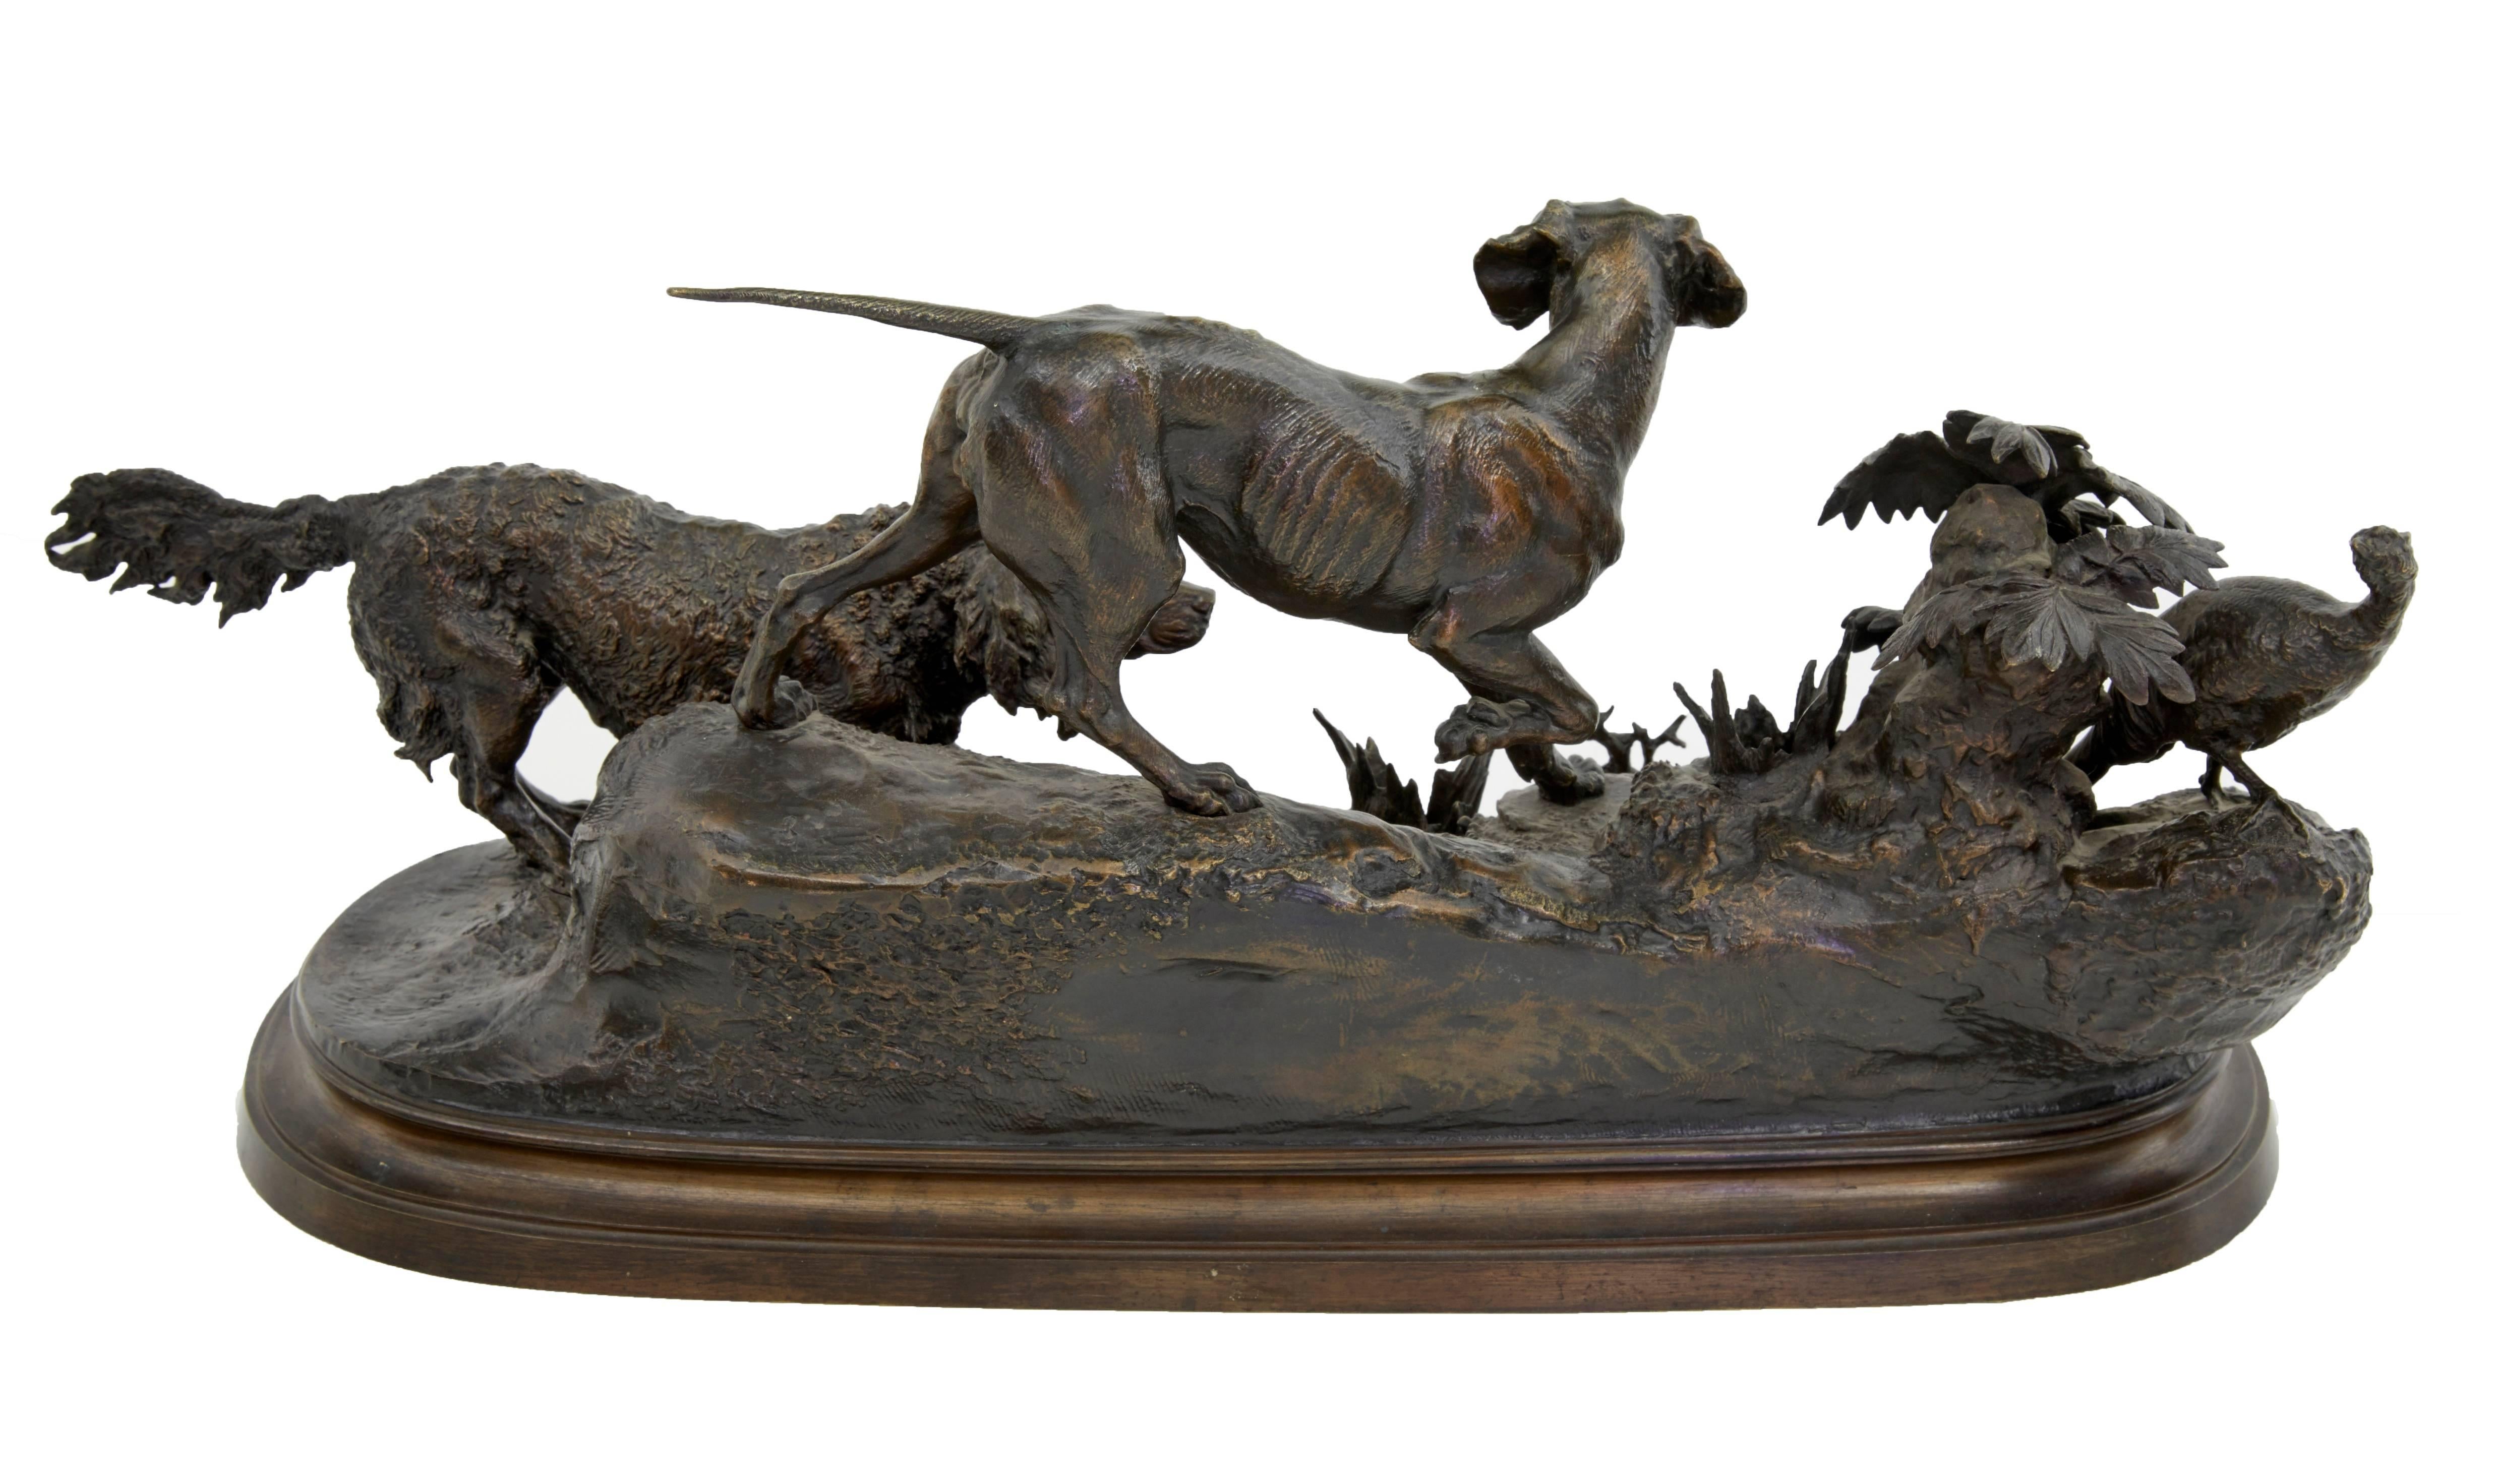 Bronze sculpture by Ferdinand Pautrot, circa 1860.

Ferdinand Pautrot born in Poitiers (1832-1874)
Well-known for his precision sculptures. This piece is a study of a pointer and a setter putting up a pheasant.

Good patination and